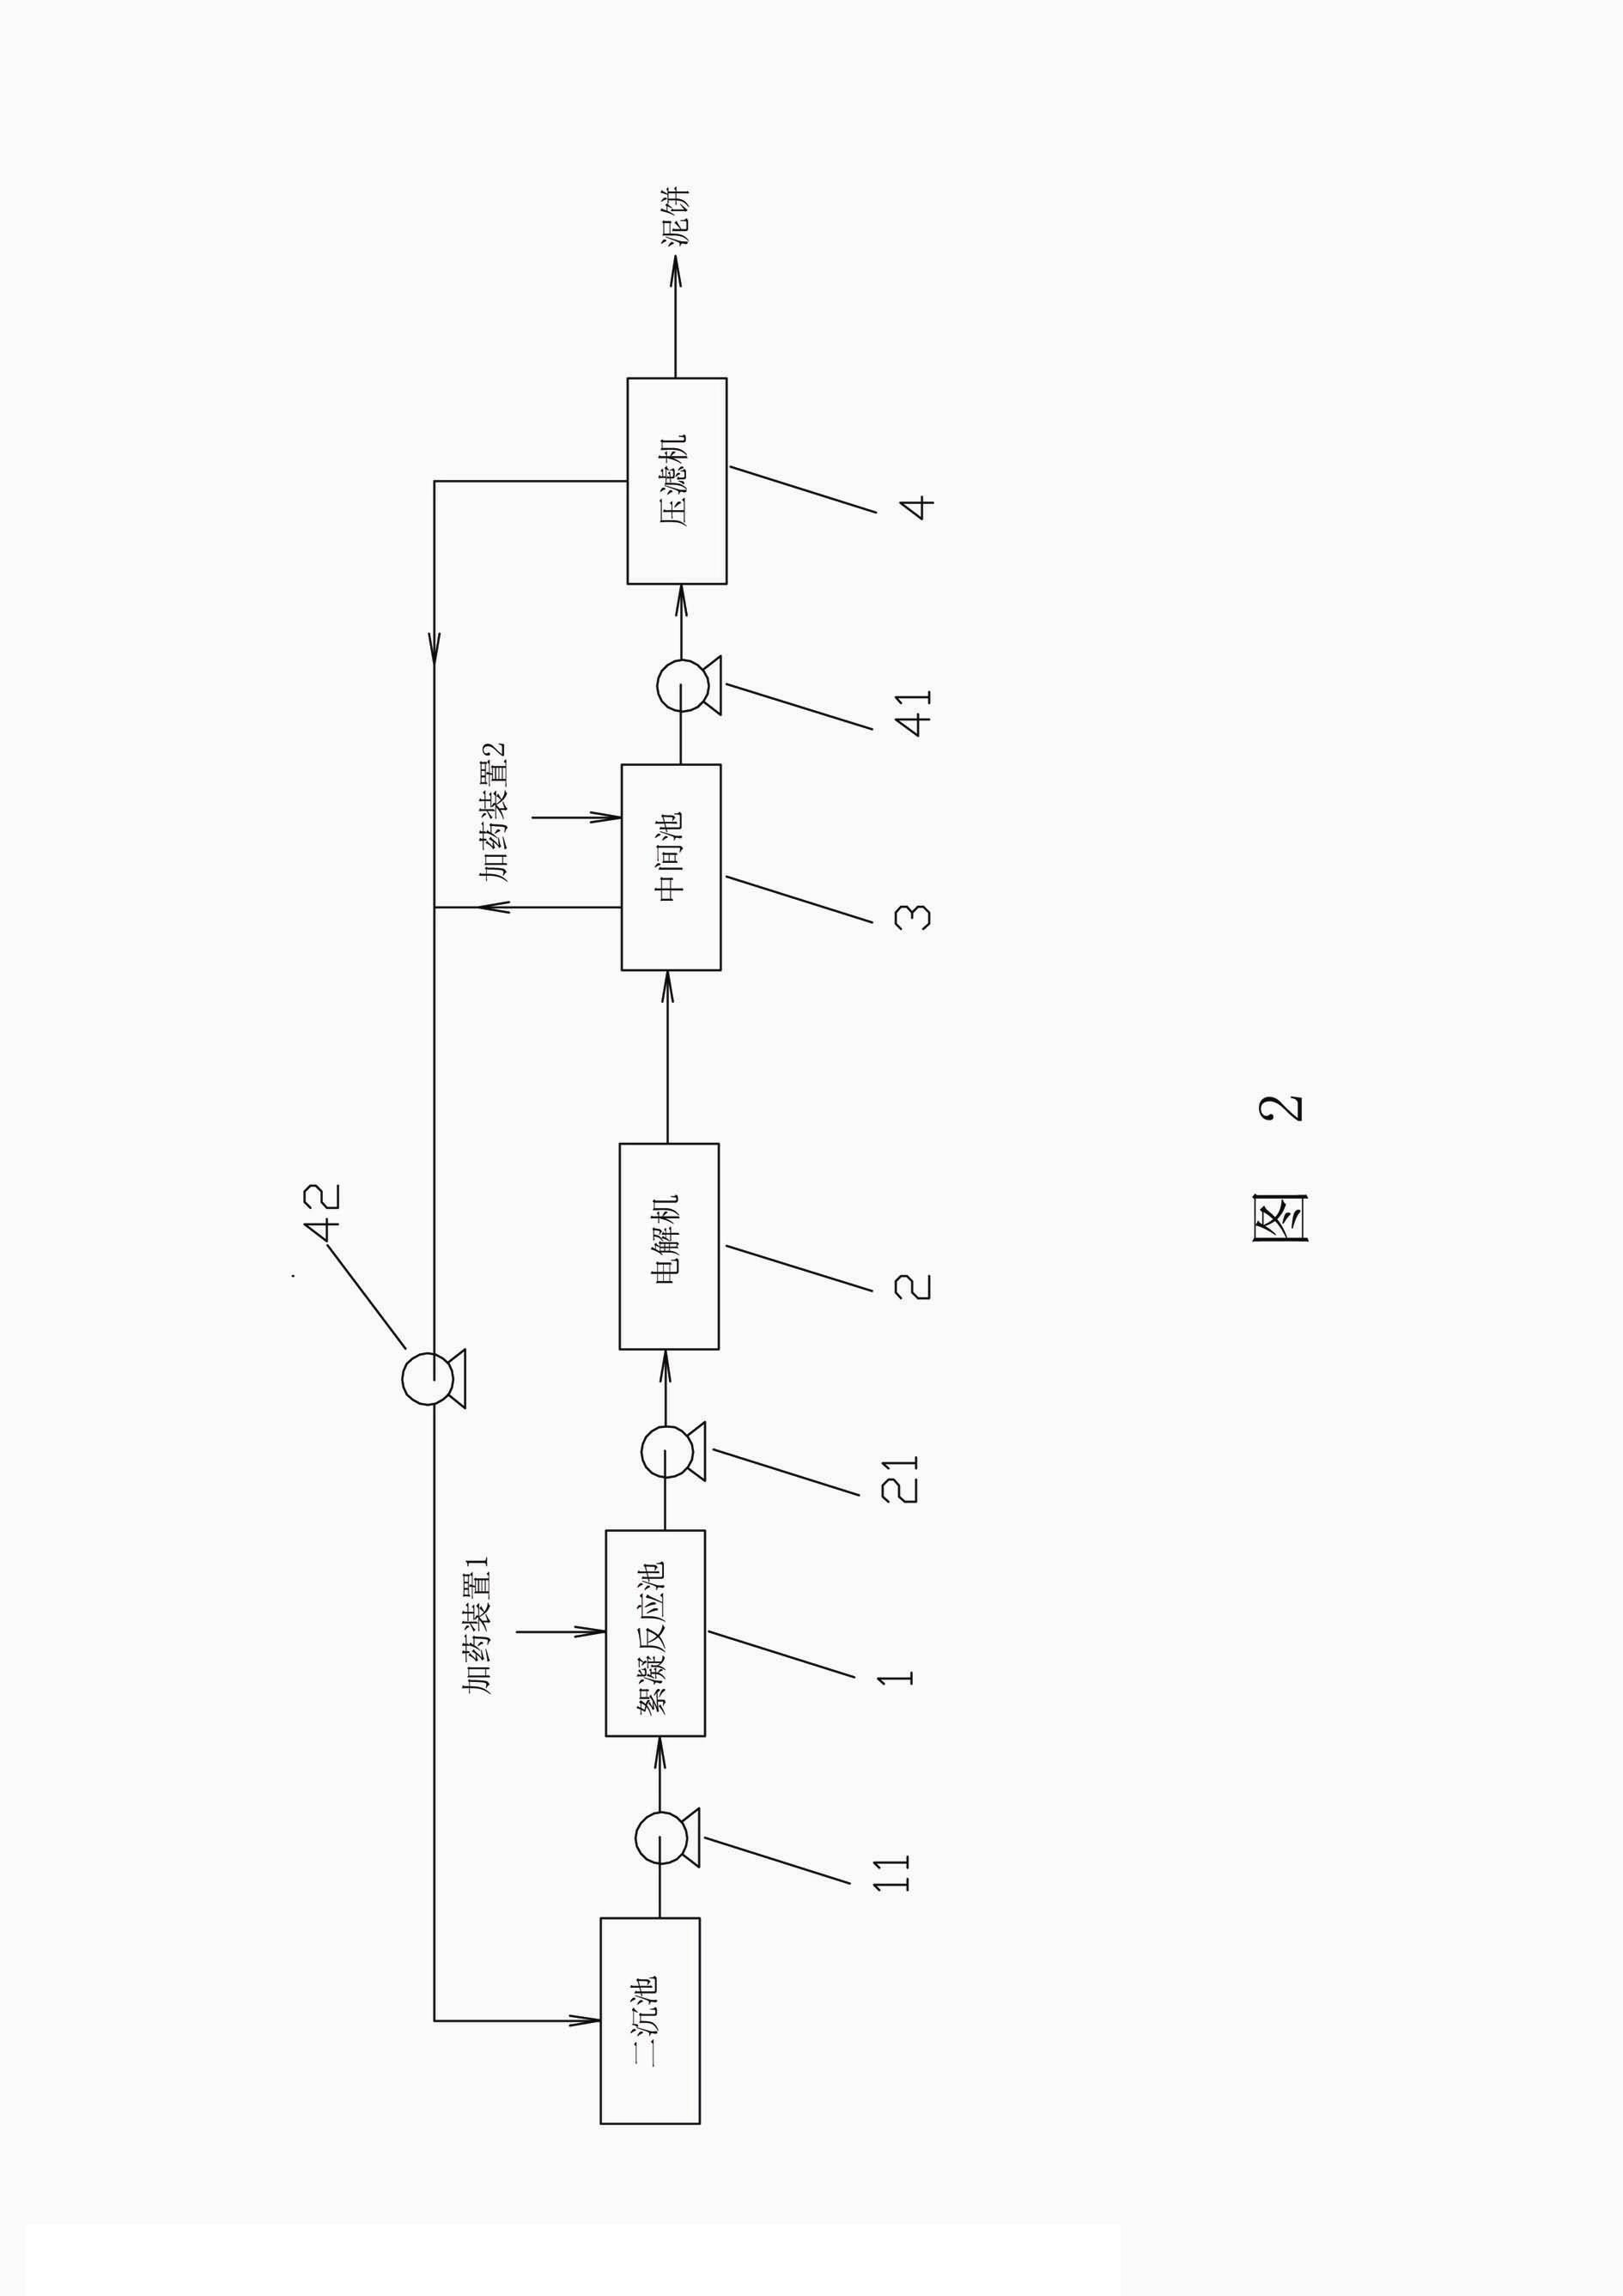 Sludge treatment device based on electrolysis and pressure filtration technologies and method thereof